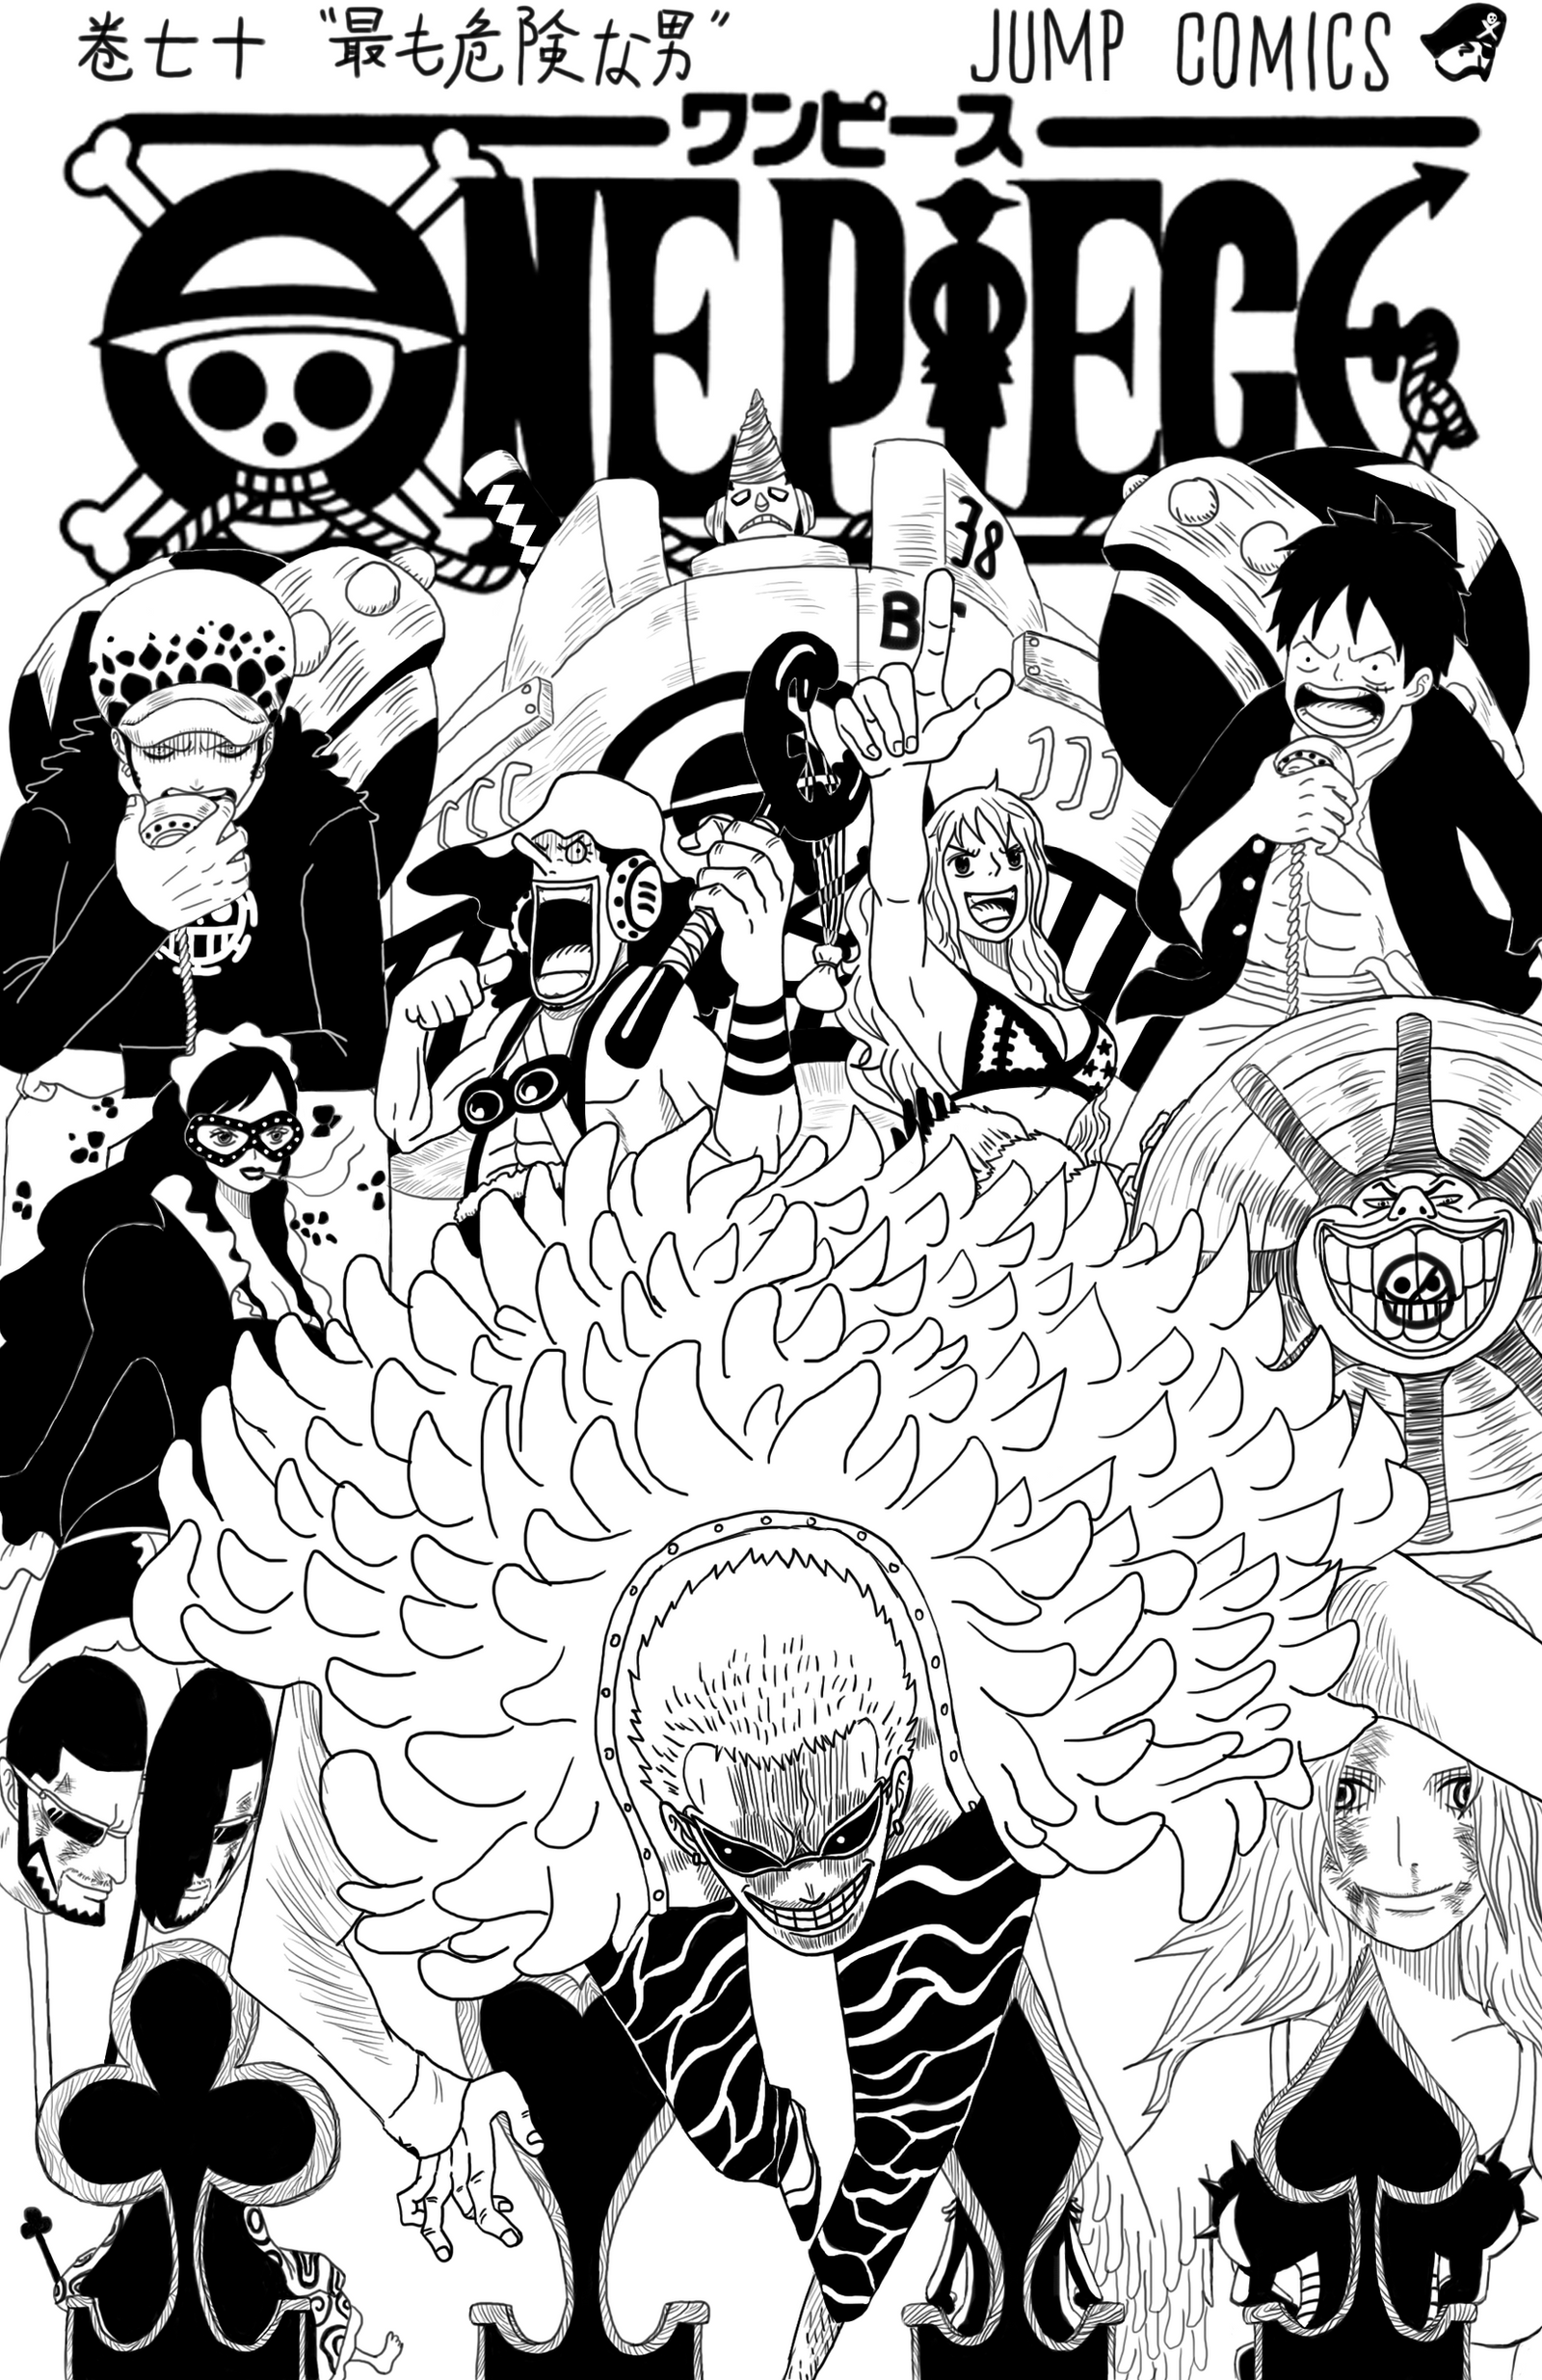 One Piece Volume 70 Fan-made Cover by TolkienOP on DeviantArt